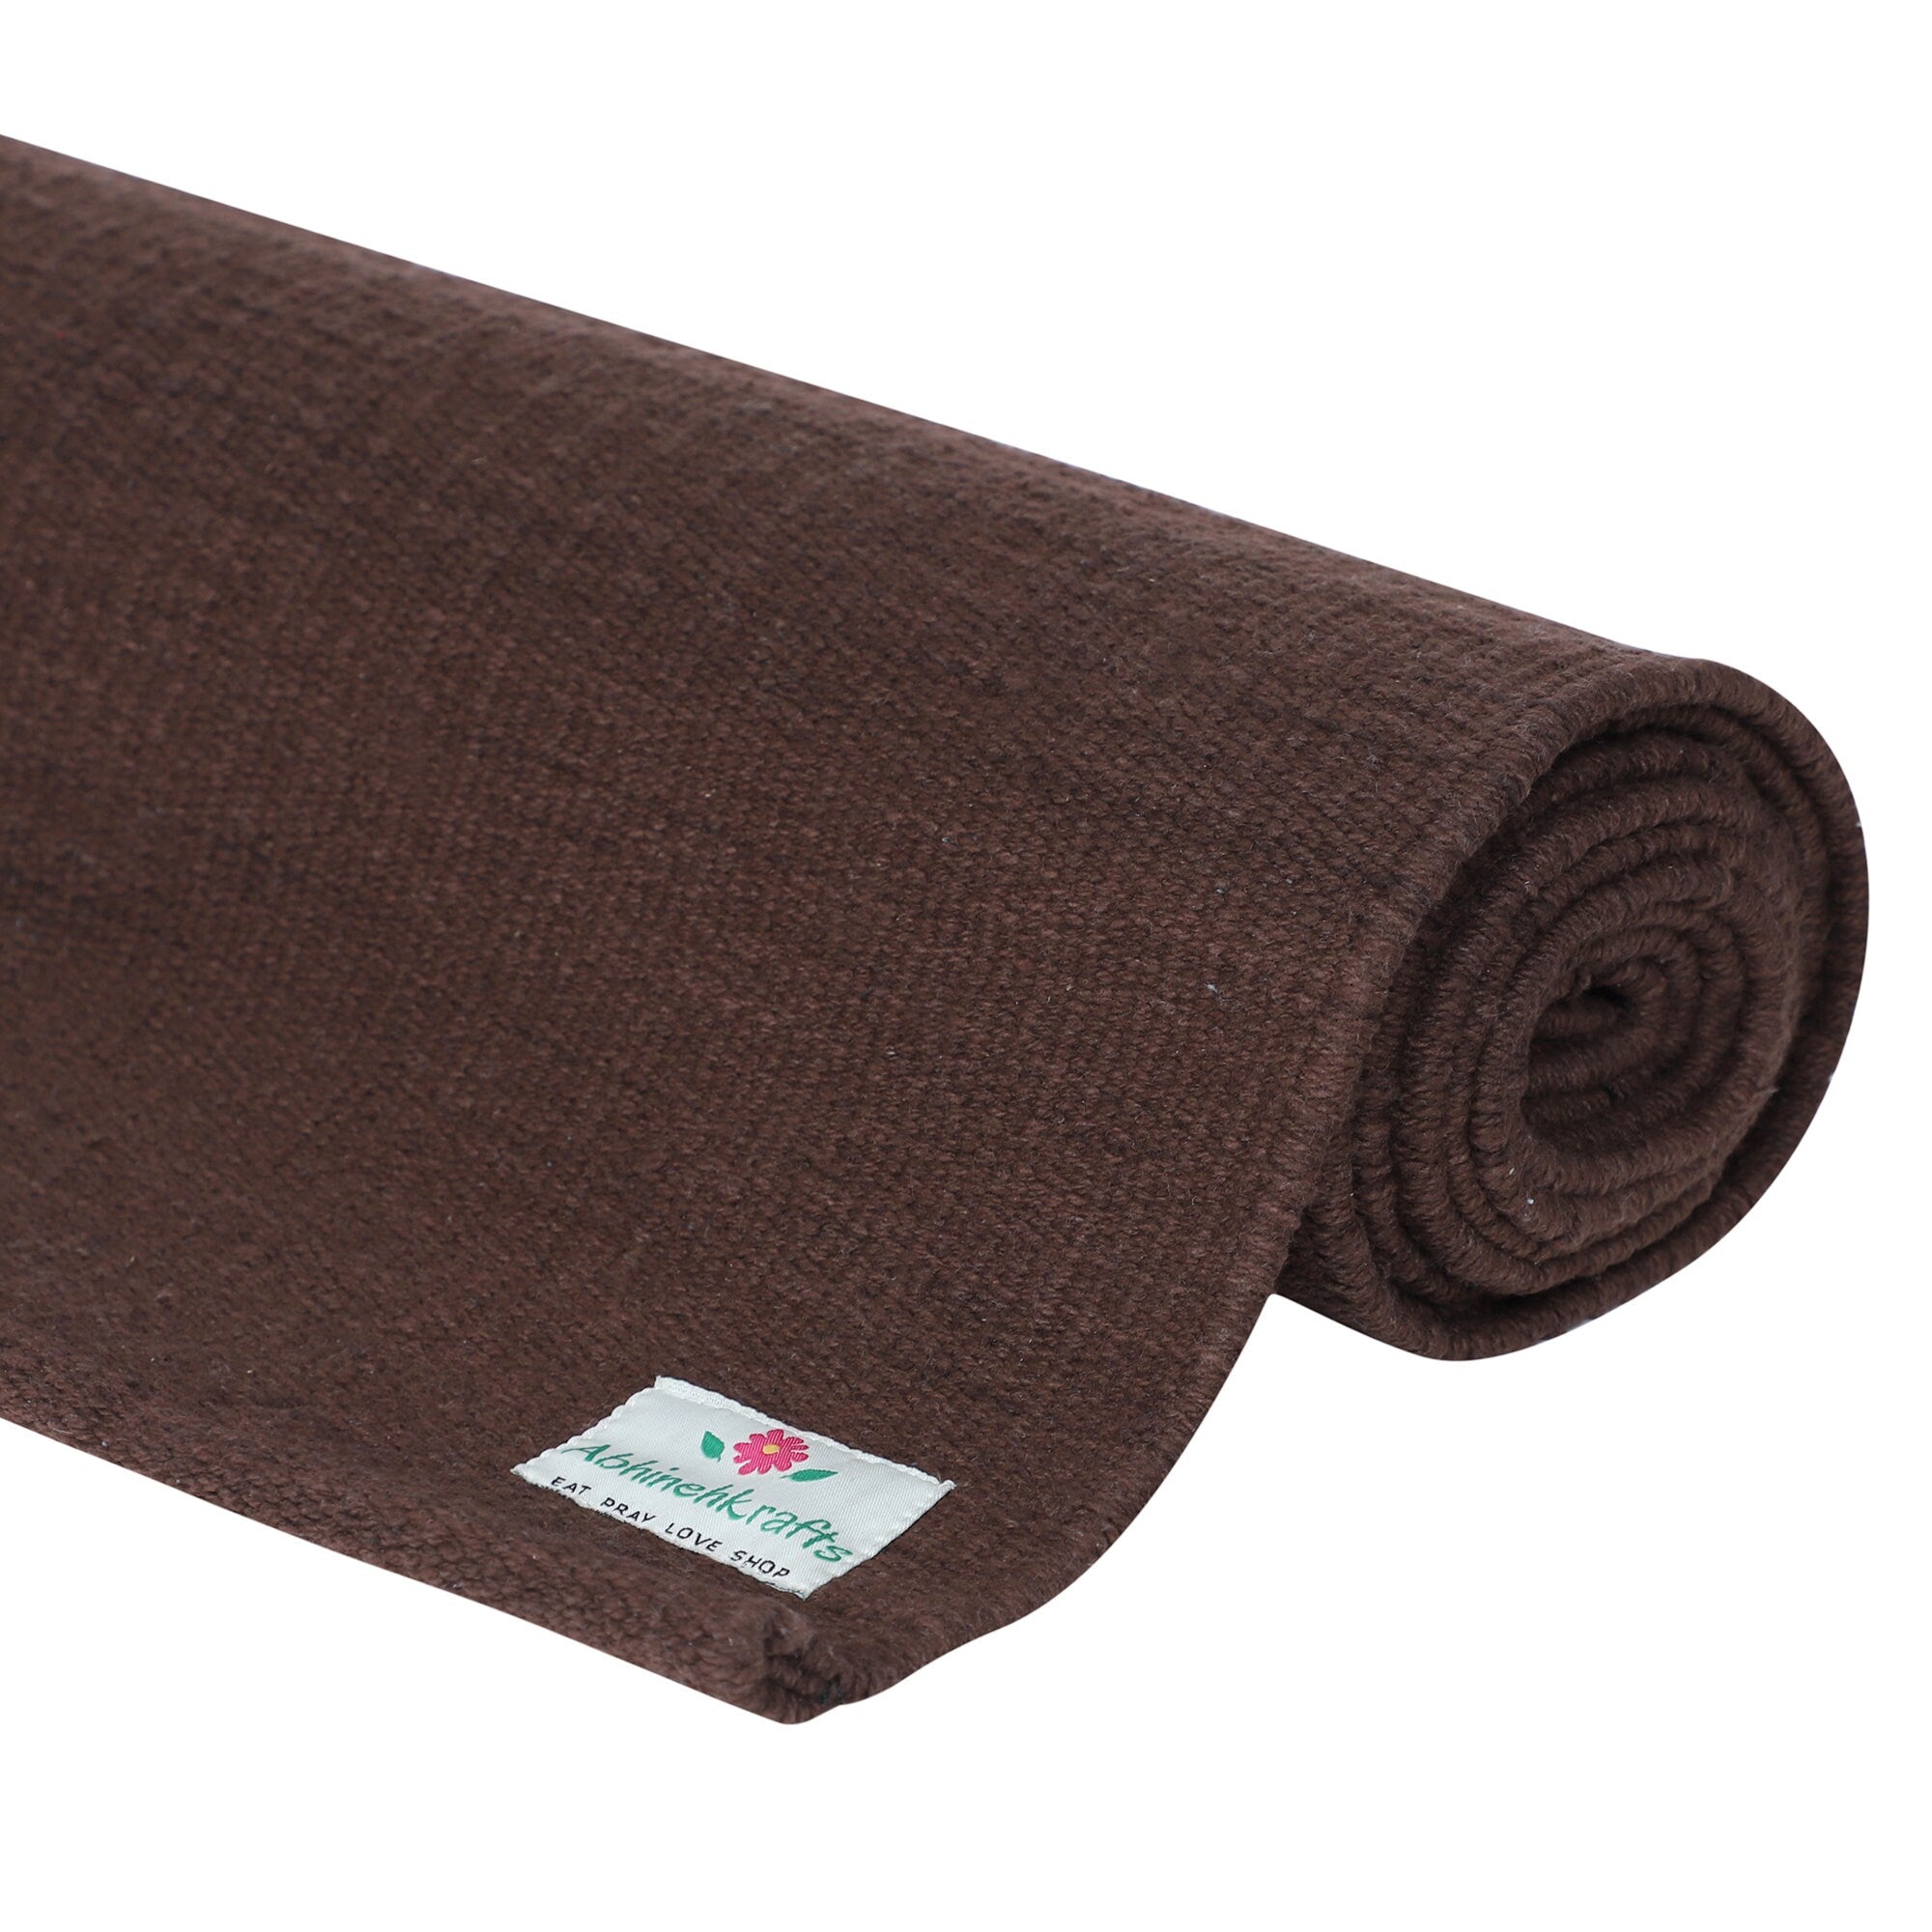 Super Thick Cotton Handwoven Anti Skid Mat for Hot Yoga and Fitness - -  YogaKargha